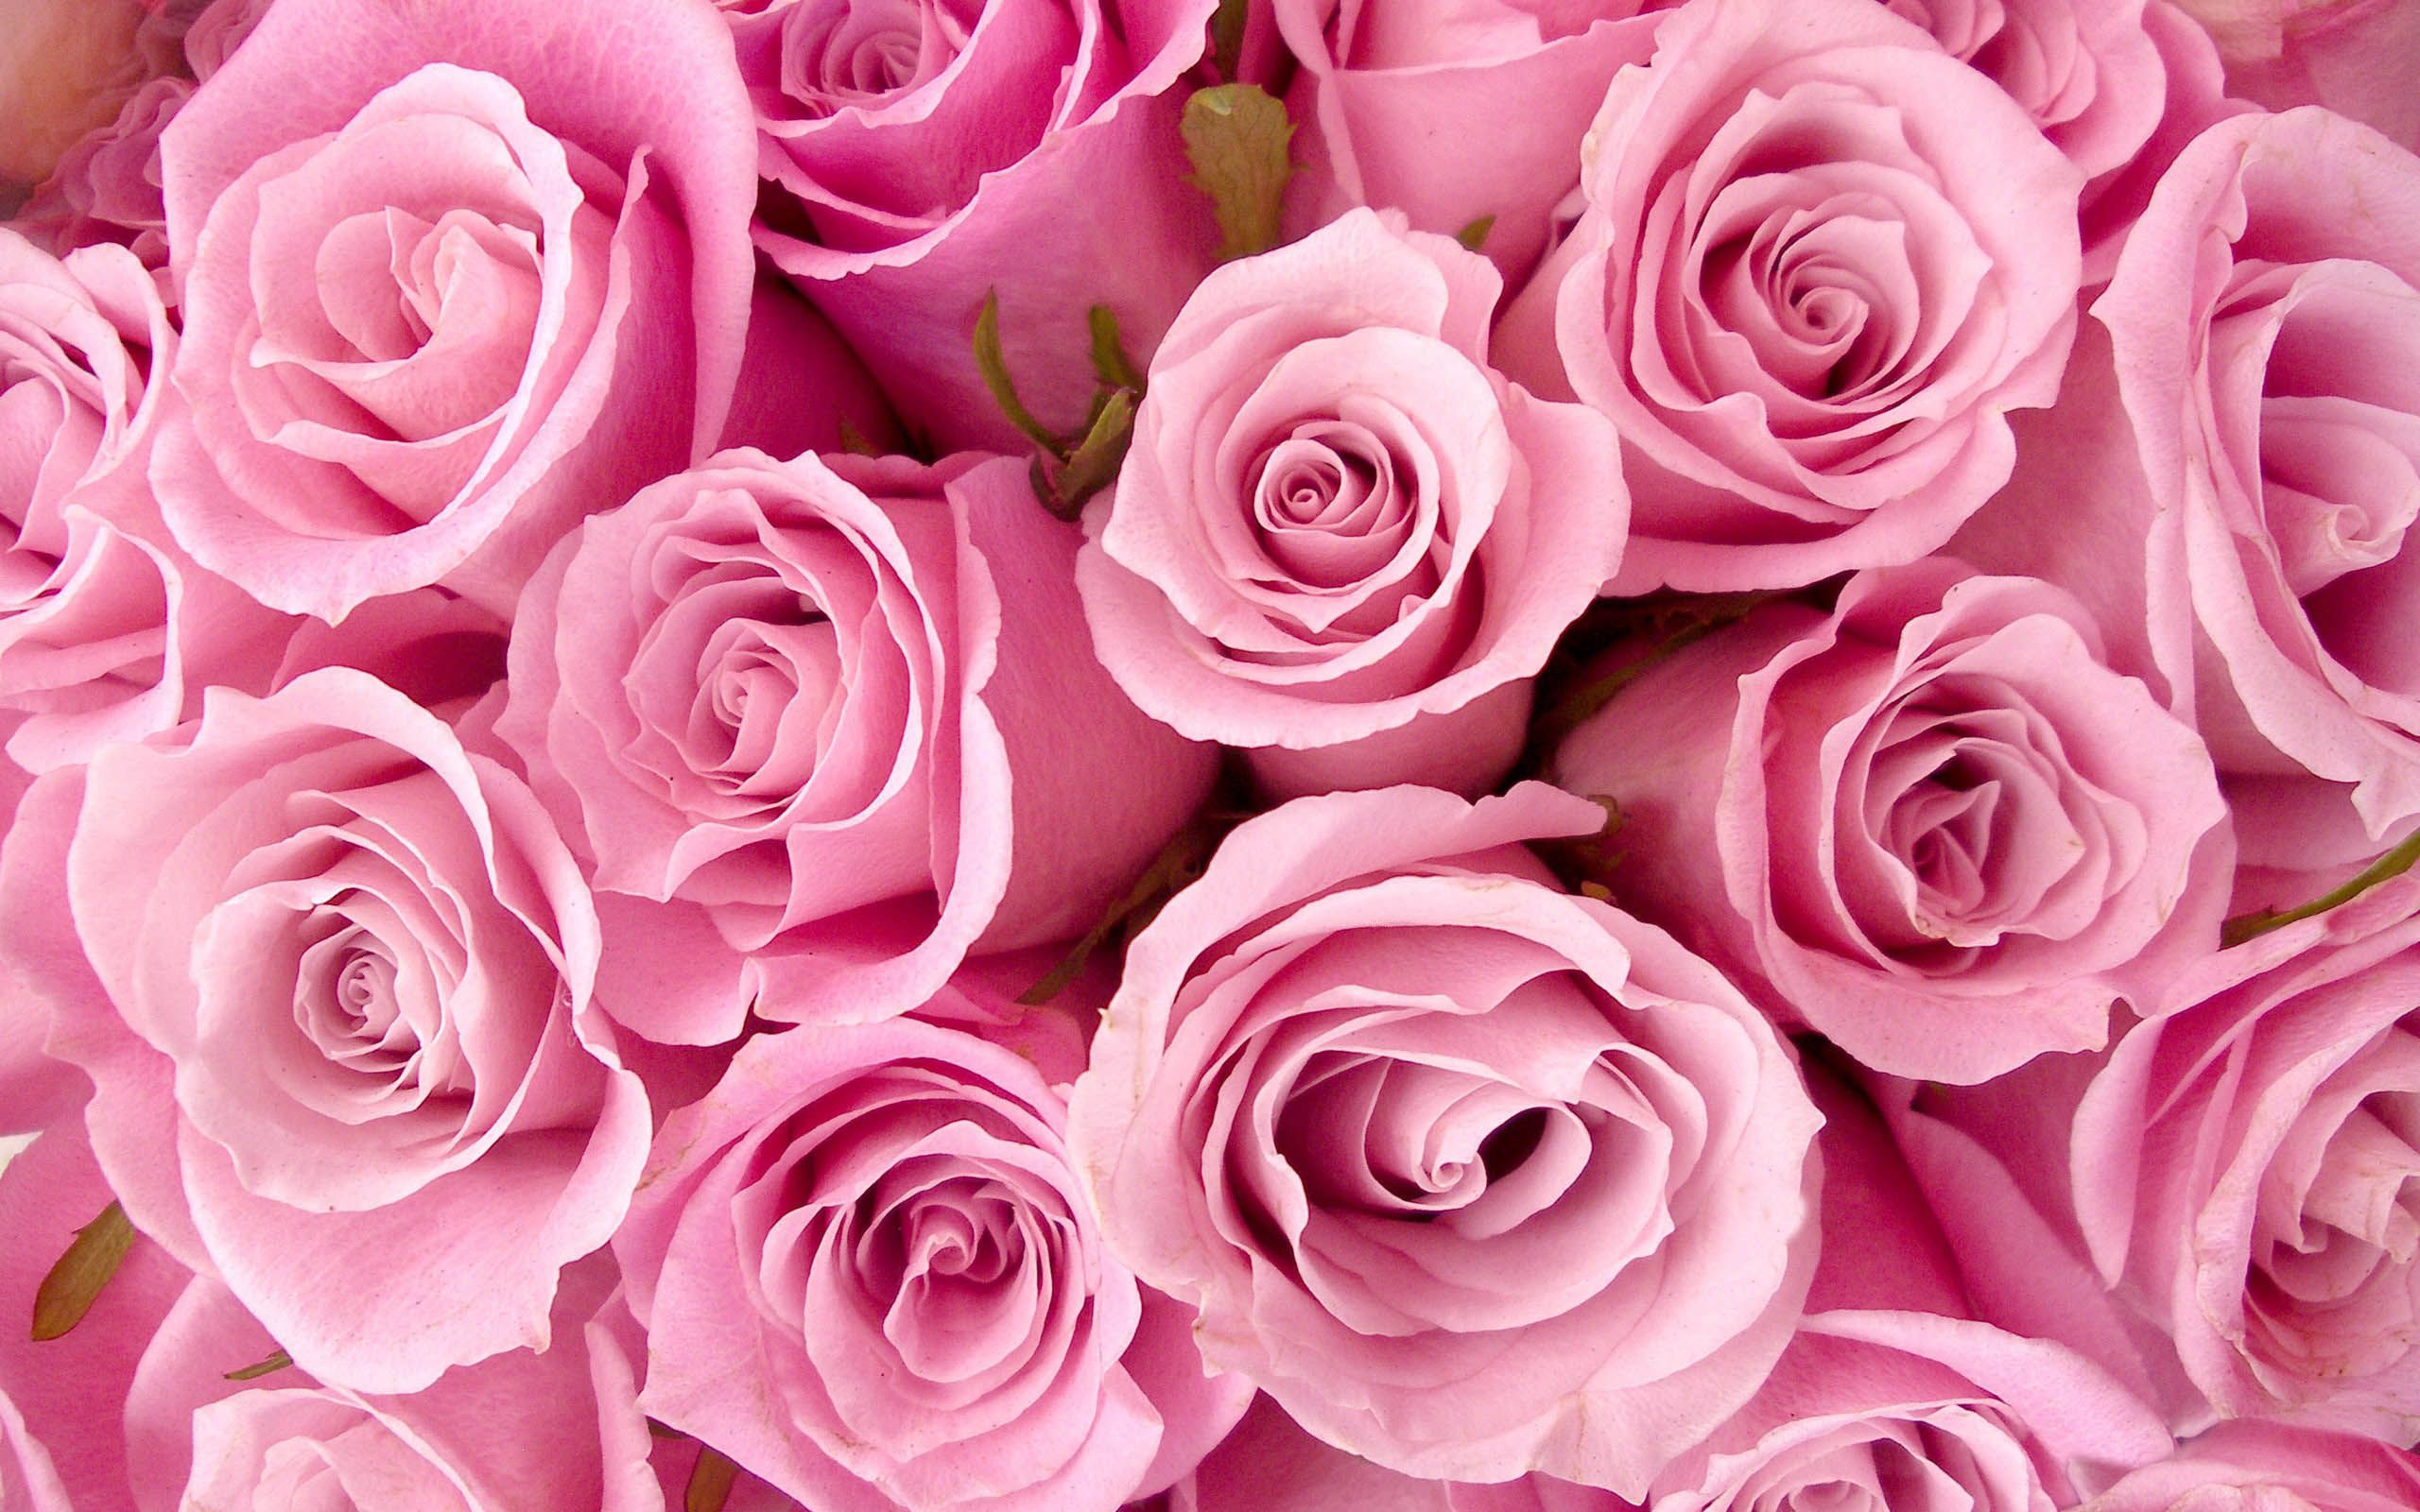 Gorgeous Roses The Meaning of Rose Colors 35 PICS